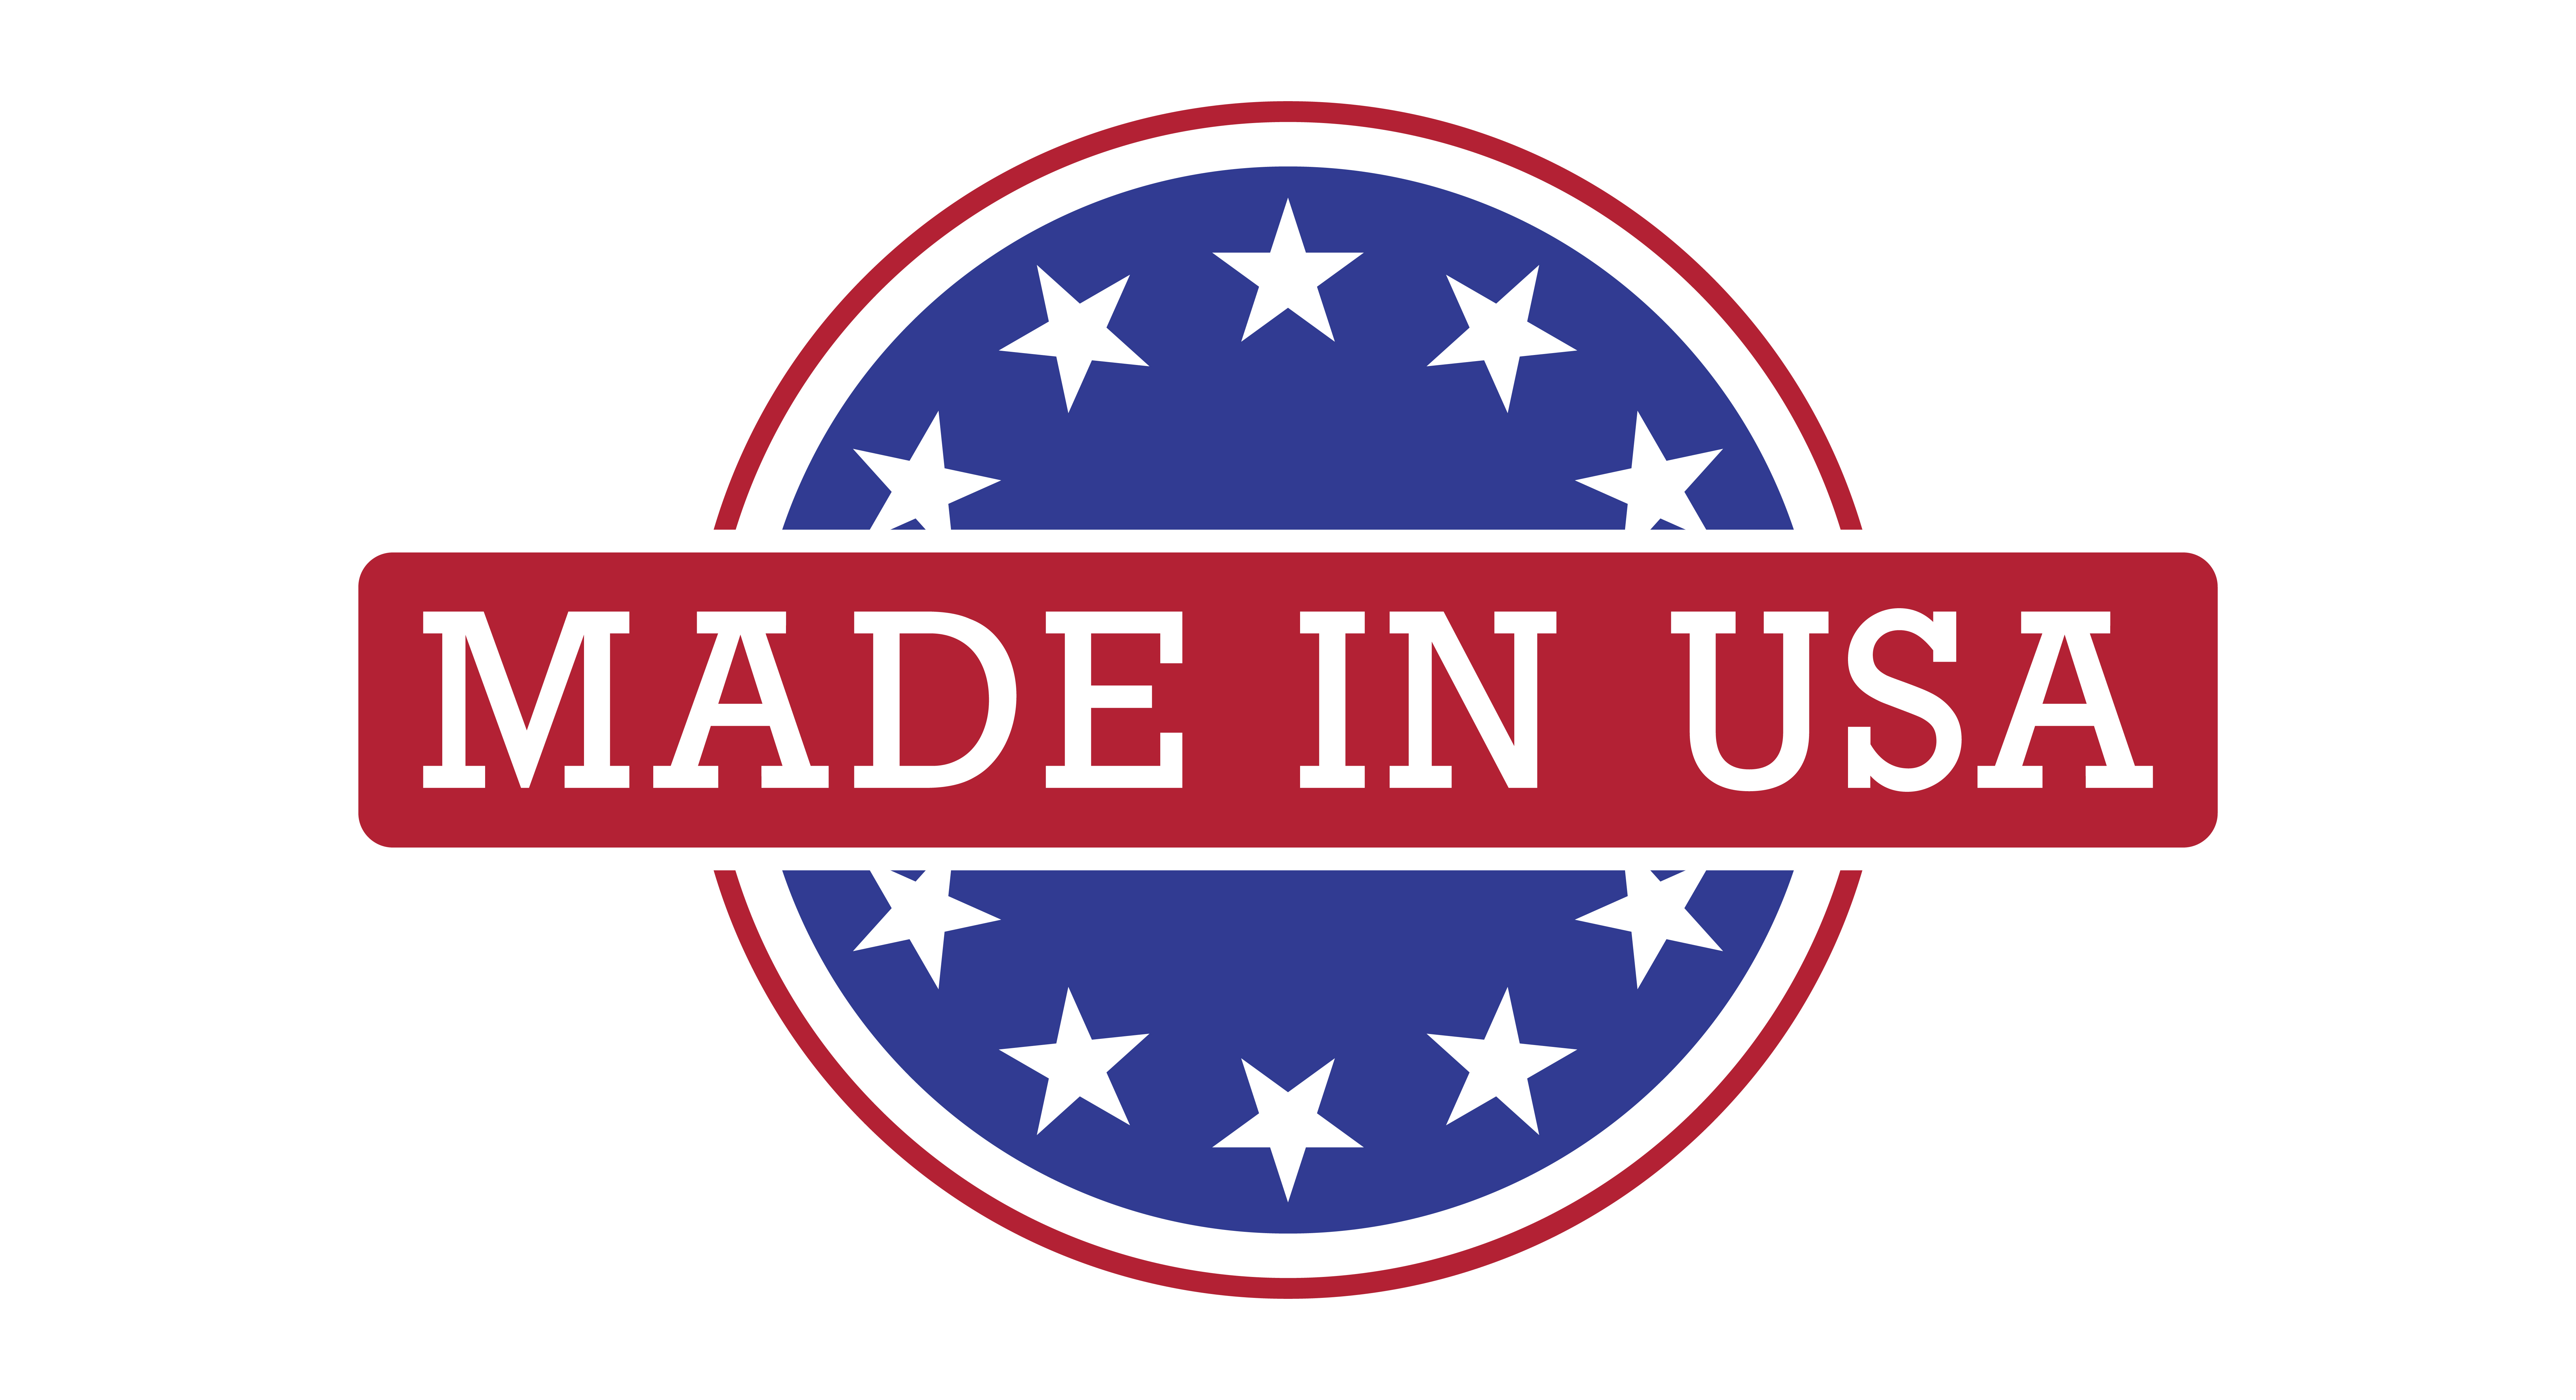 Made in USA round badge. Flat style vector illustration.. Made in USA round badge. Vector illustration